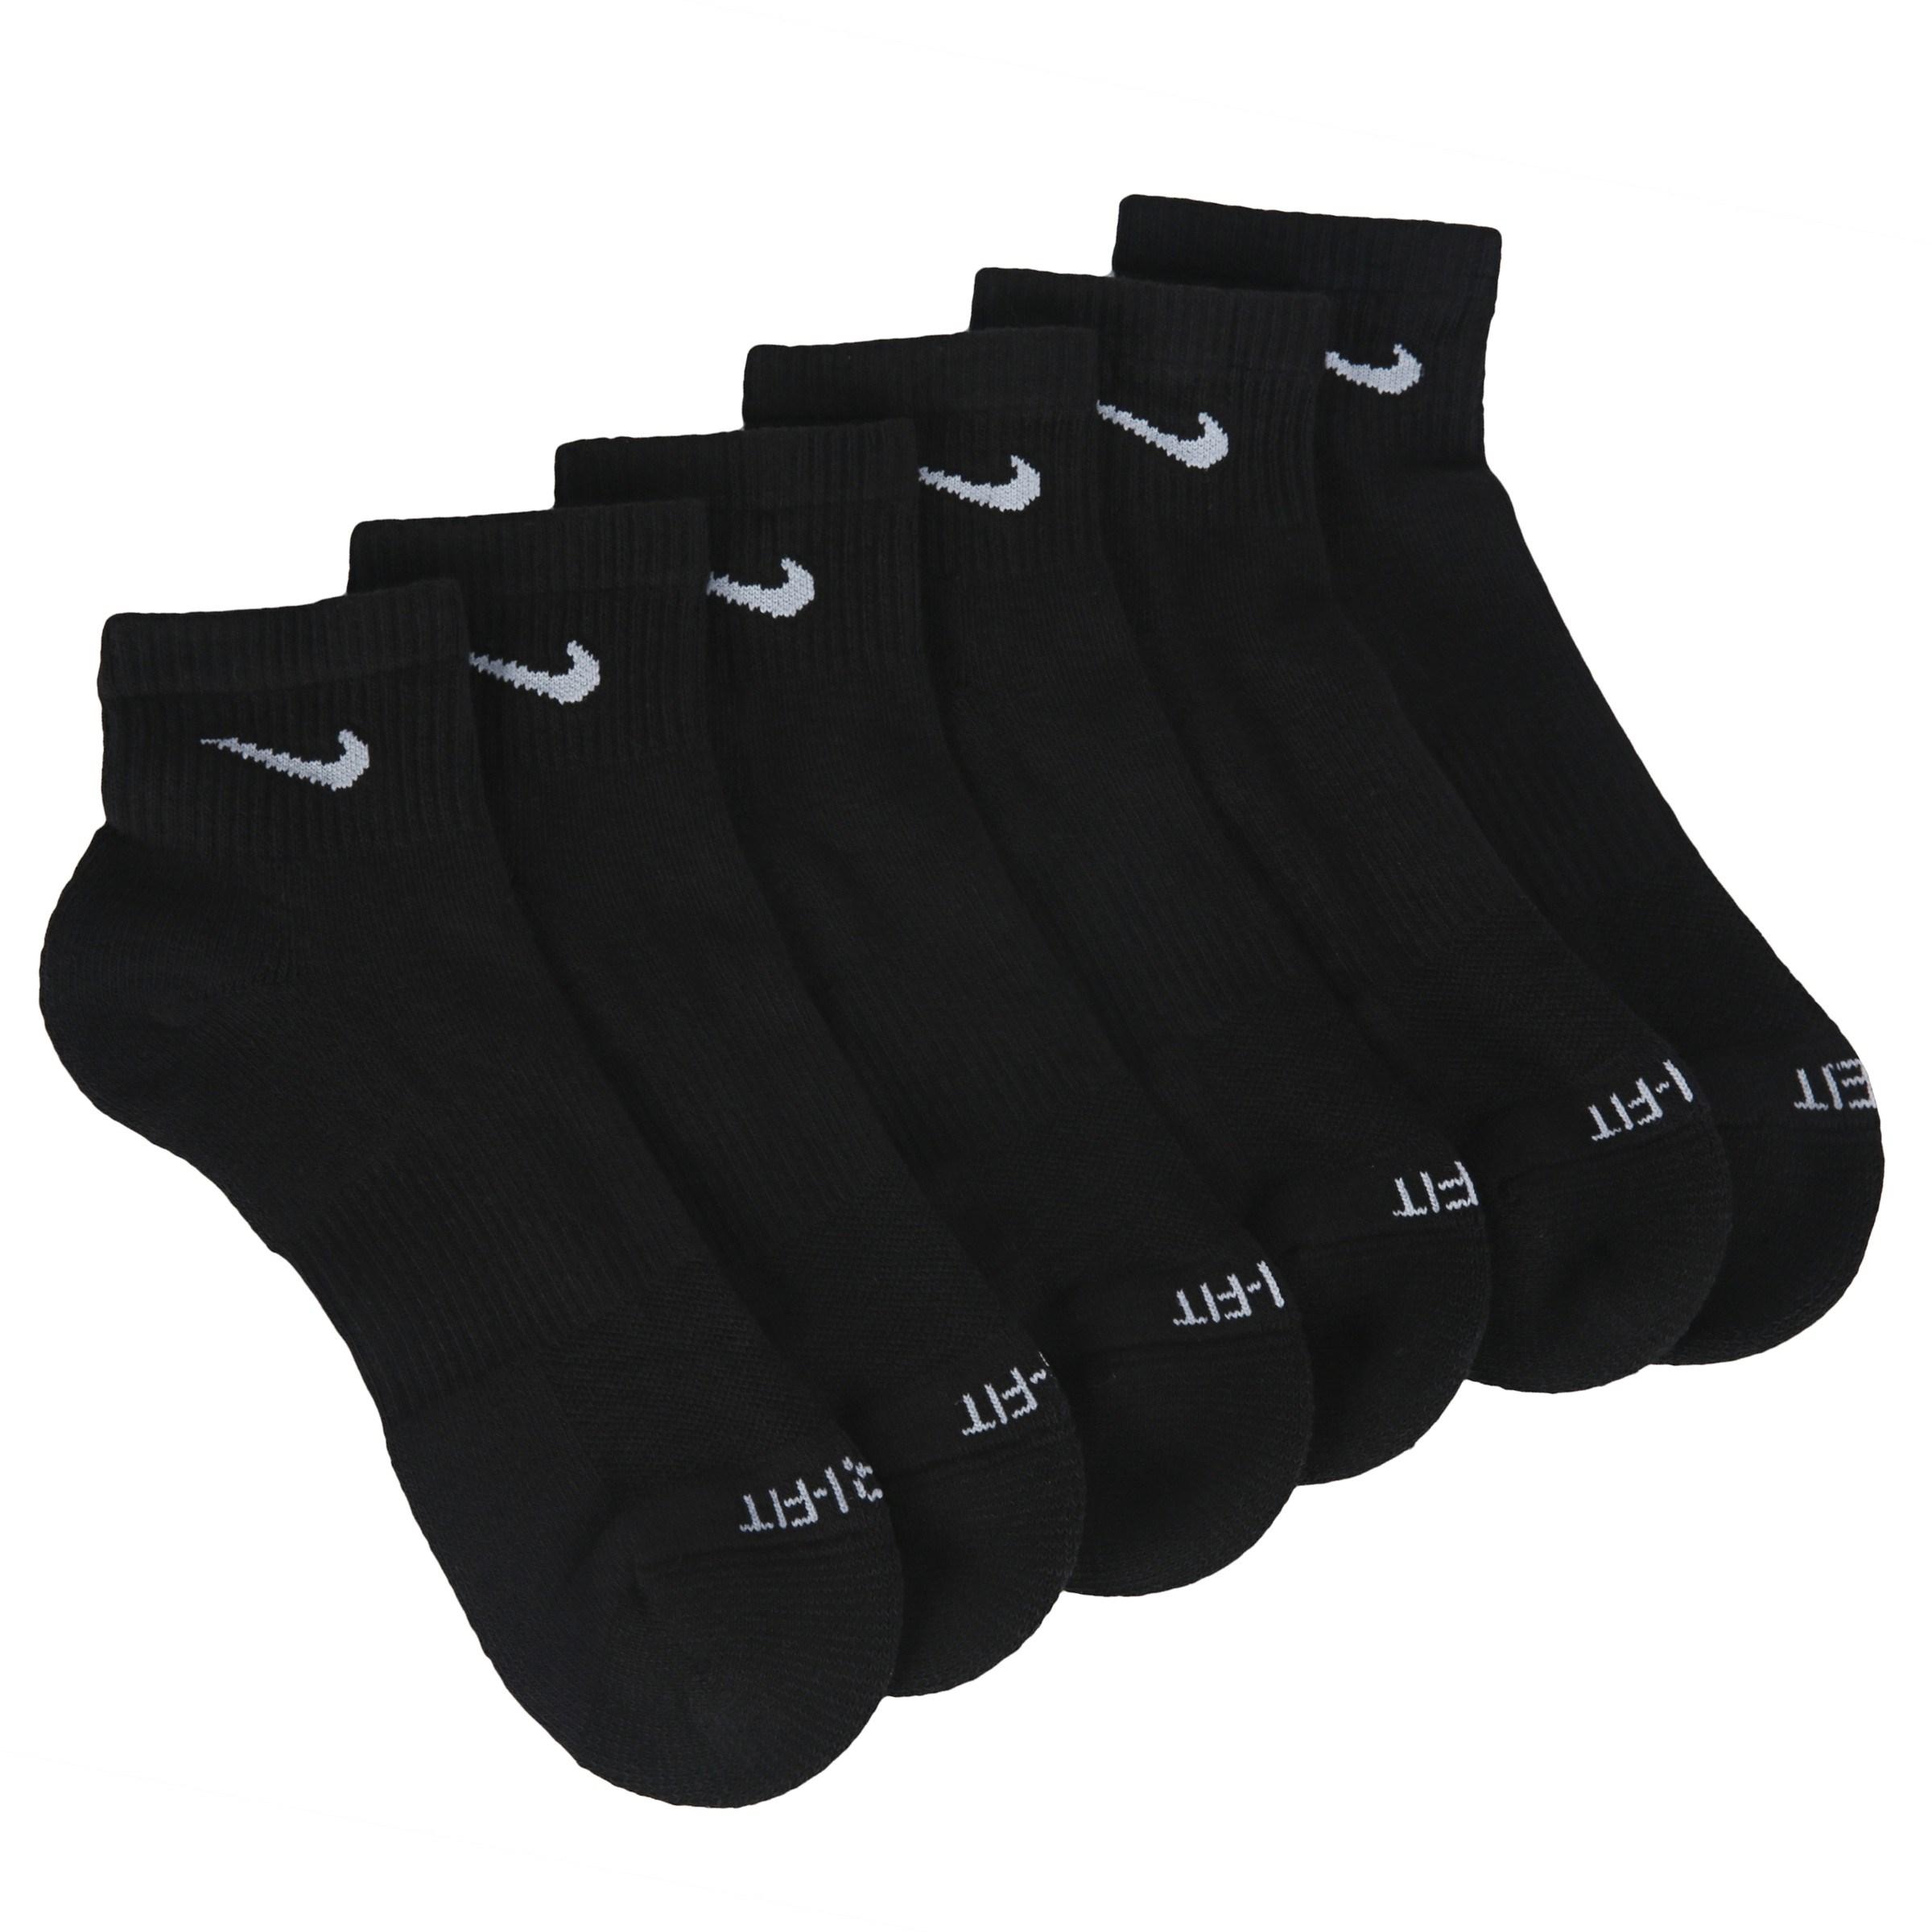 Nike Cotton 6 Pack Large Everyday Plus Cushion Ankle Socks in Black - Lyst